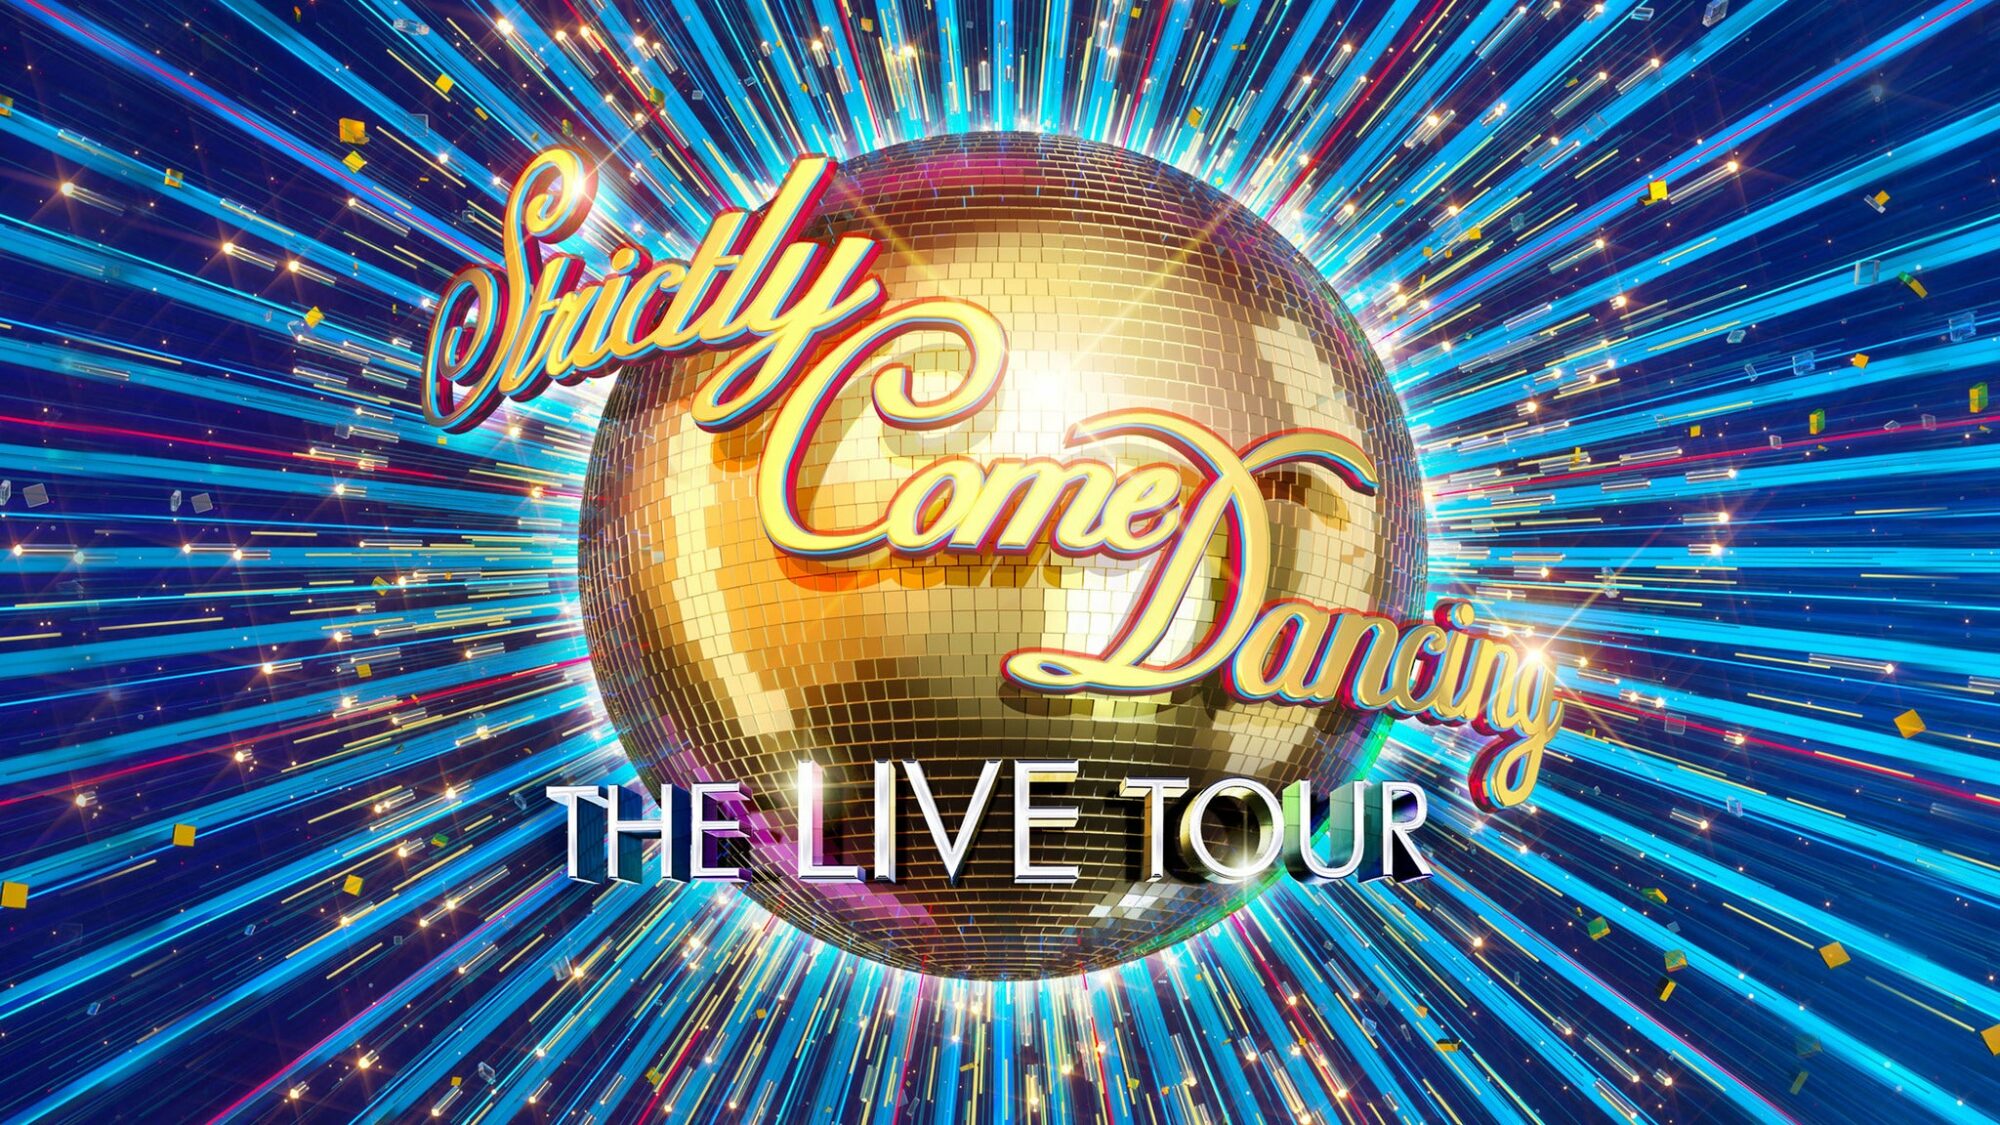 Strictly Come Dancing The Live Tour 2023 at Utilita Arena Sheffield